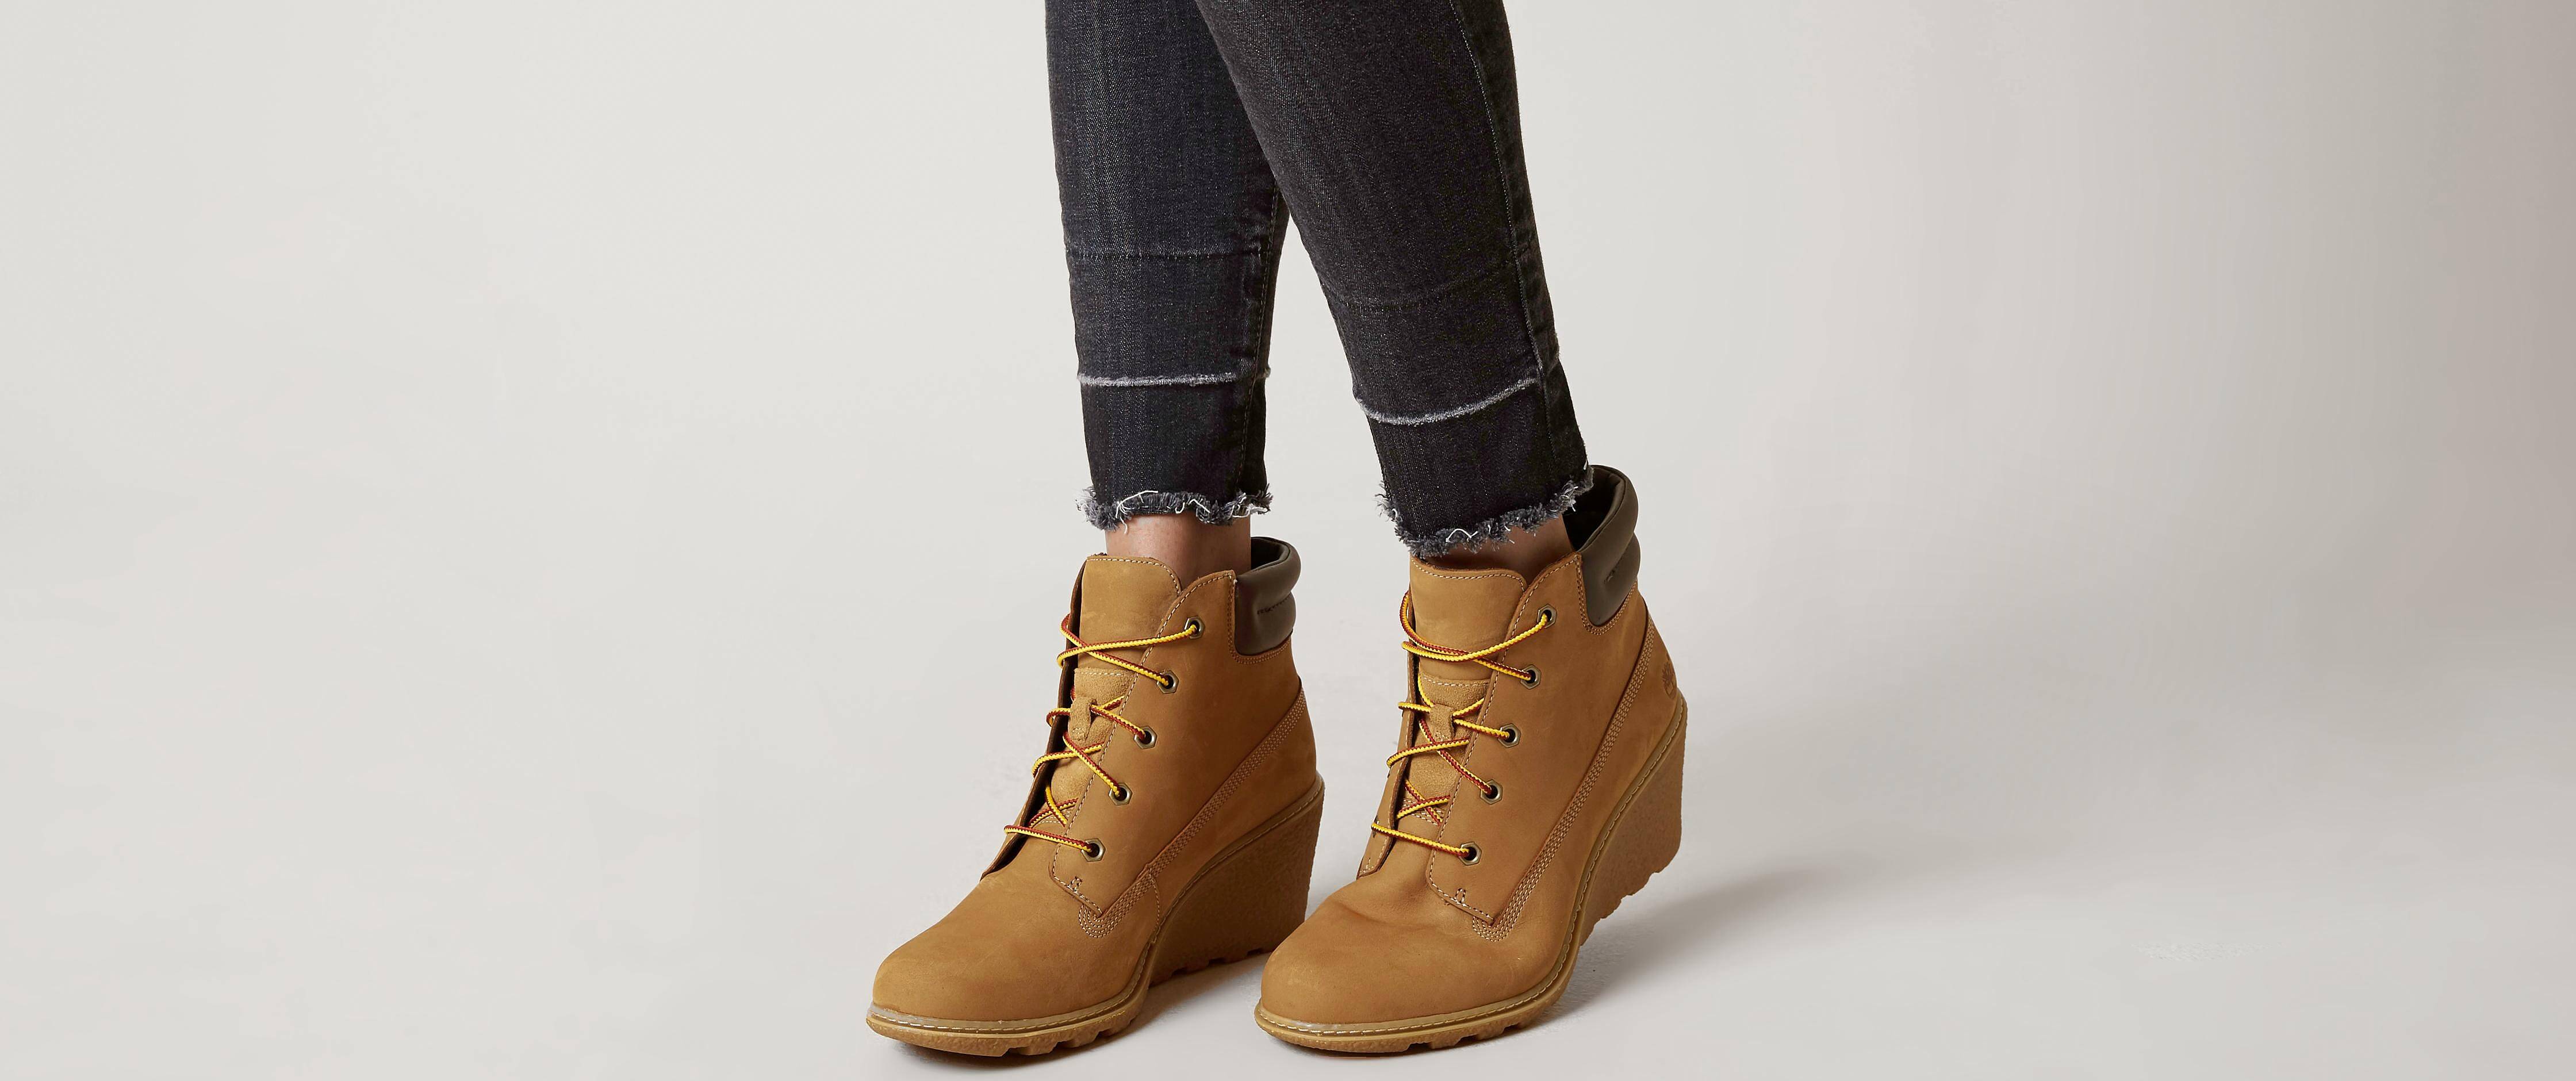 timberland wedge ankle boots